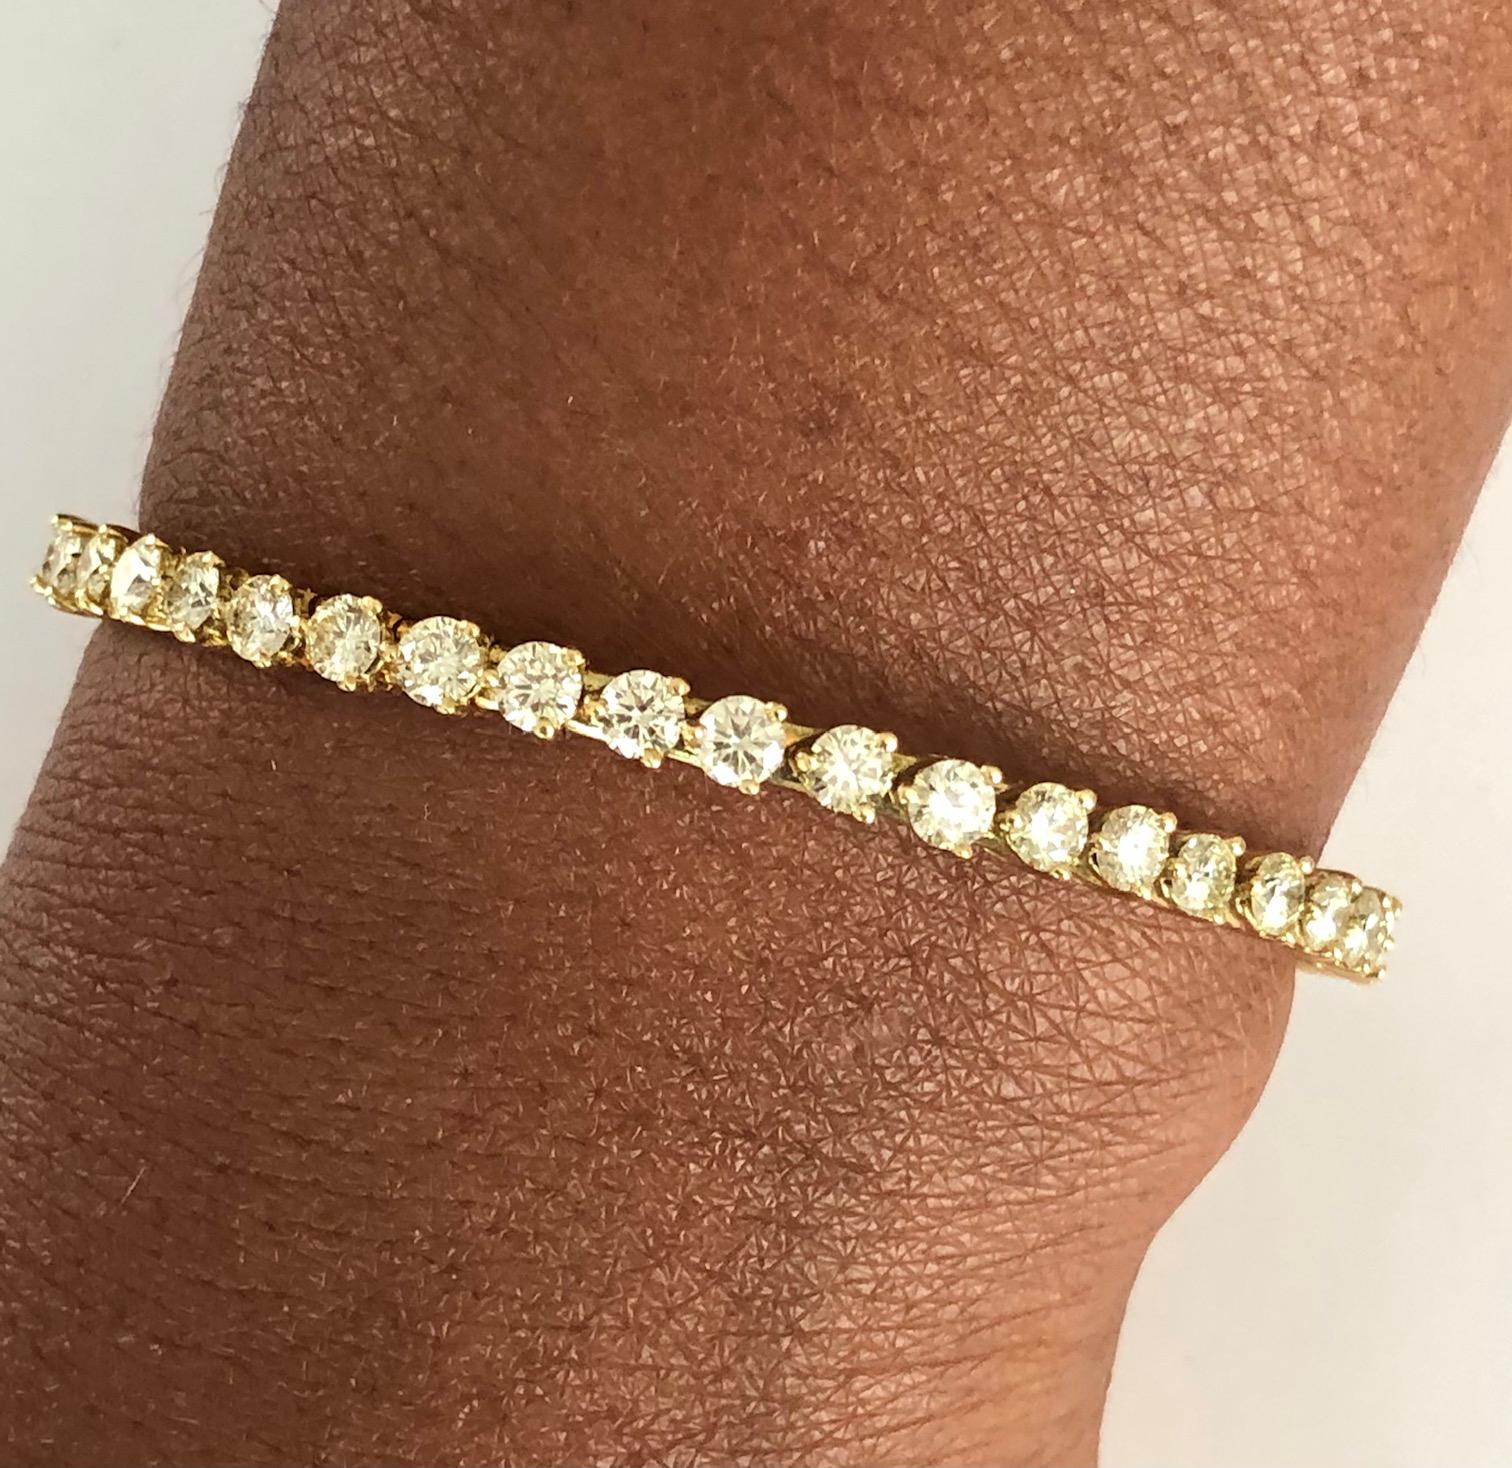 Our New method of Eliminating the need for a clasp, has made this Tennis Bracelet easy to wear on and off, our proprietary inner Gold Spring allows the Bracelet to extend over your wrist and snap closed once it's on.
This Bracelet is made in 18K